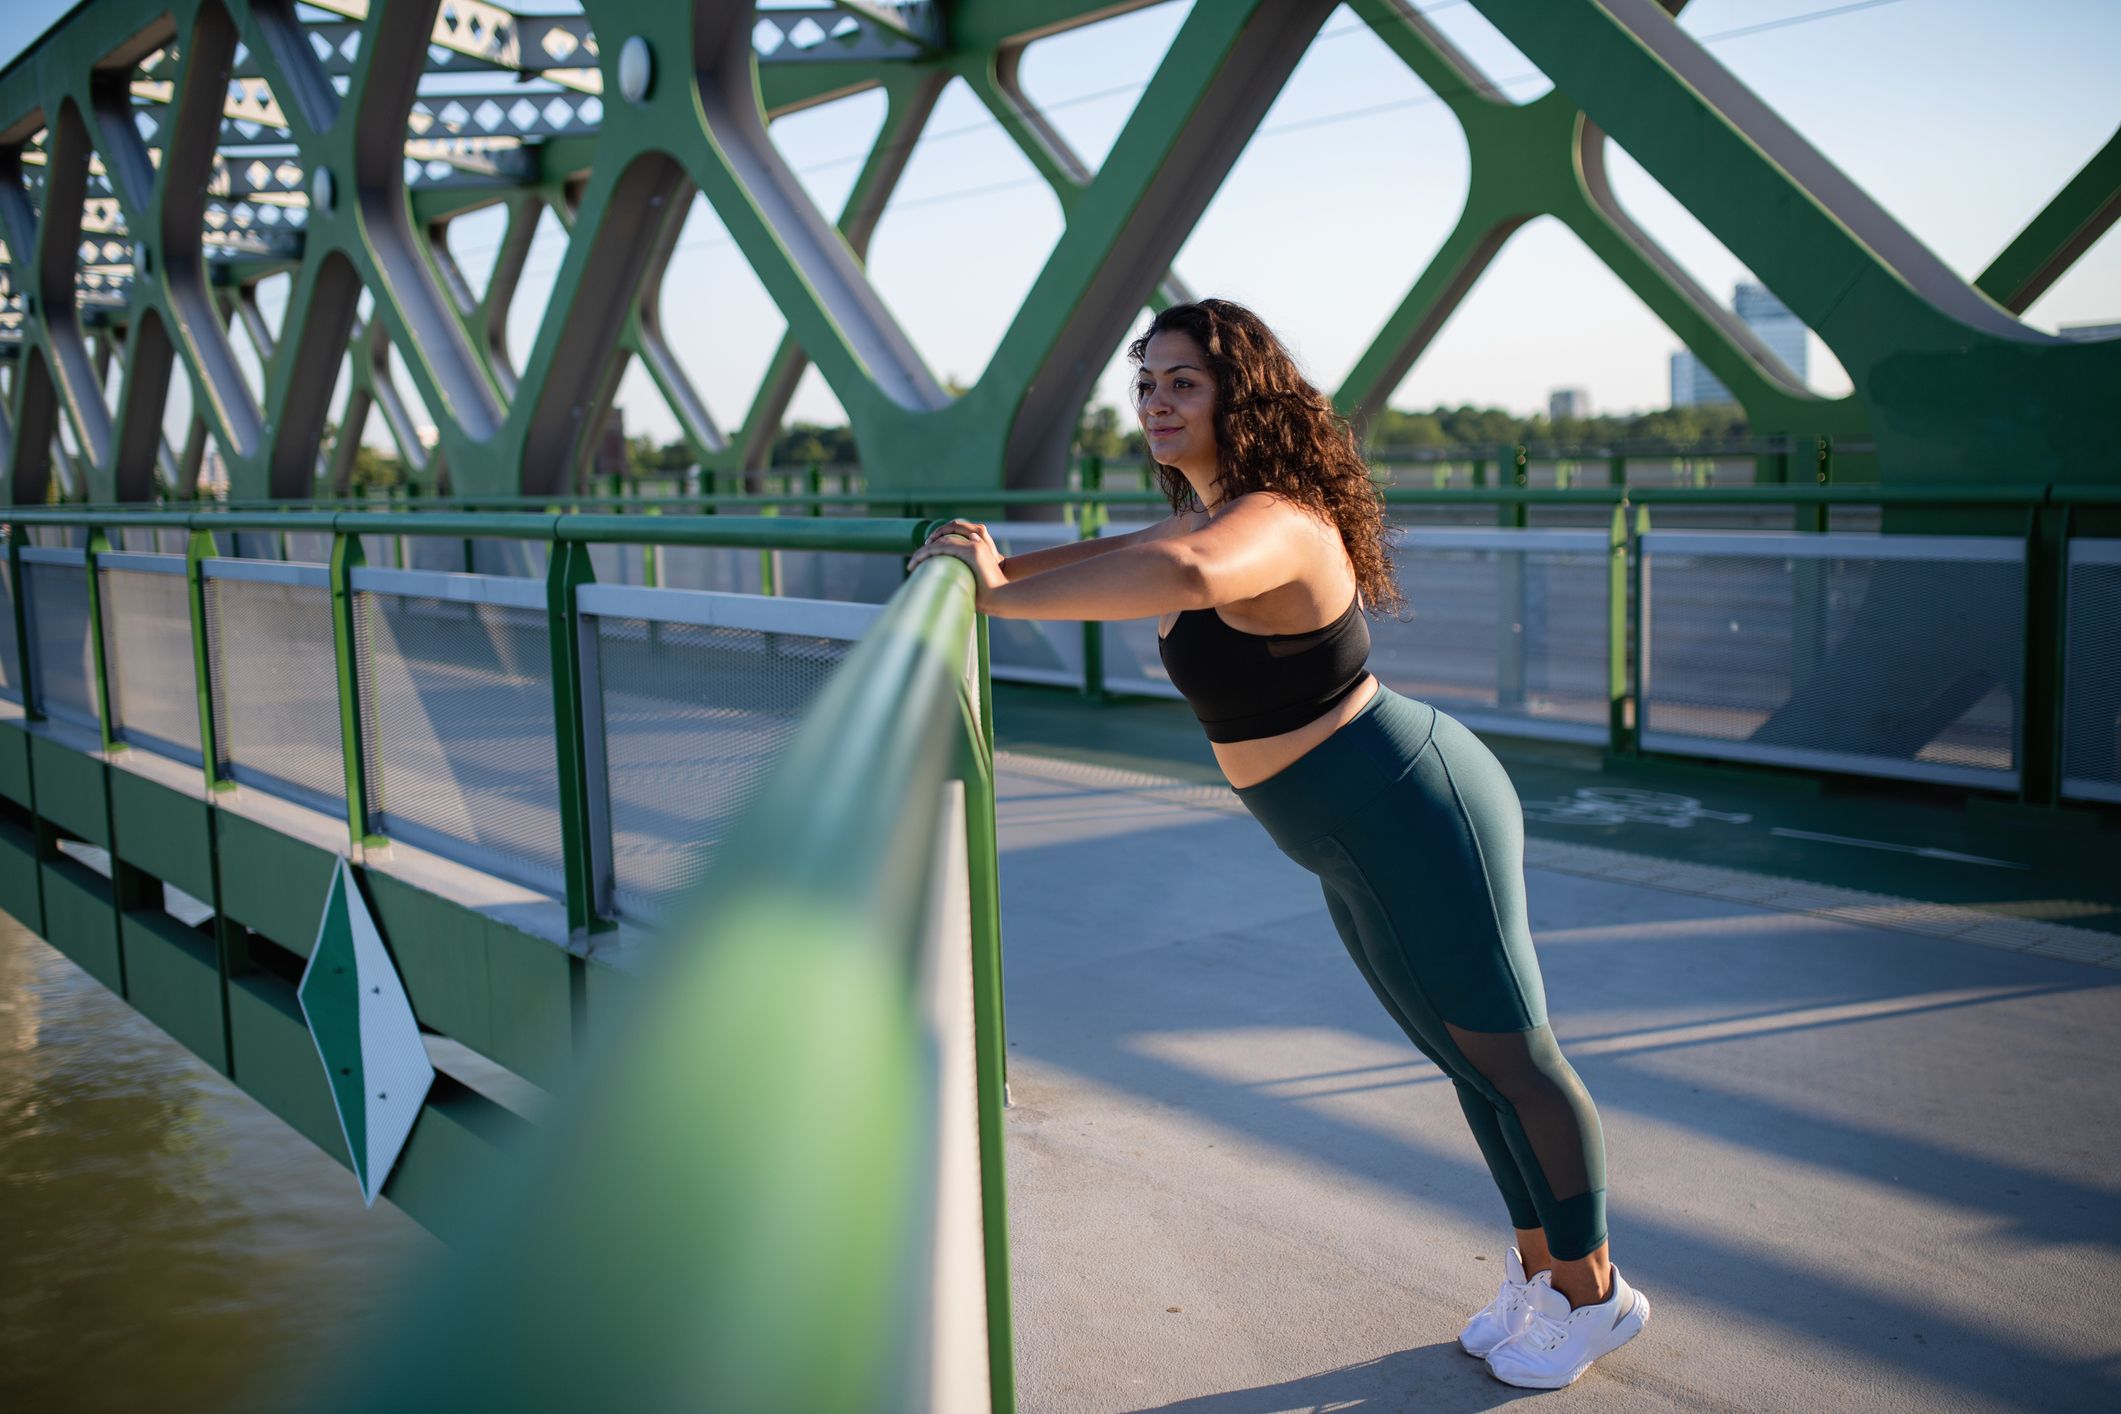 The Best Yoga Pants In 2021, According to Reviews